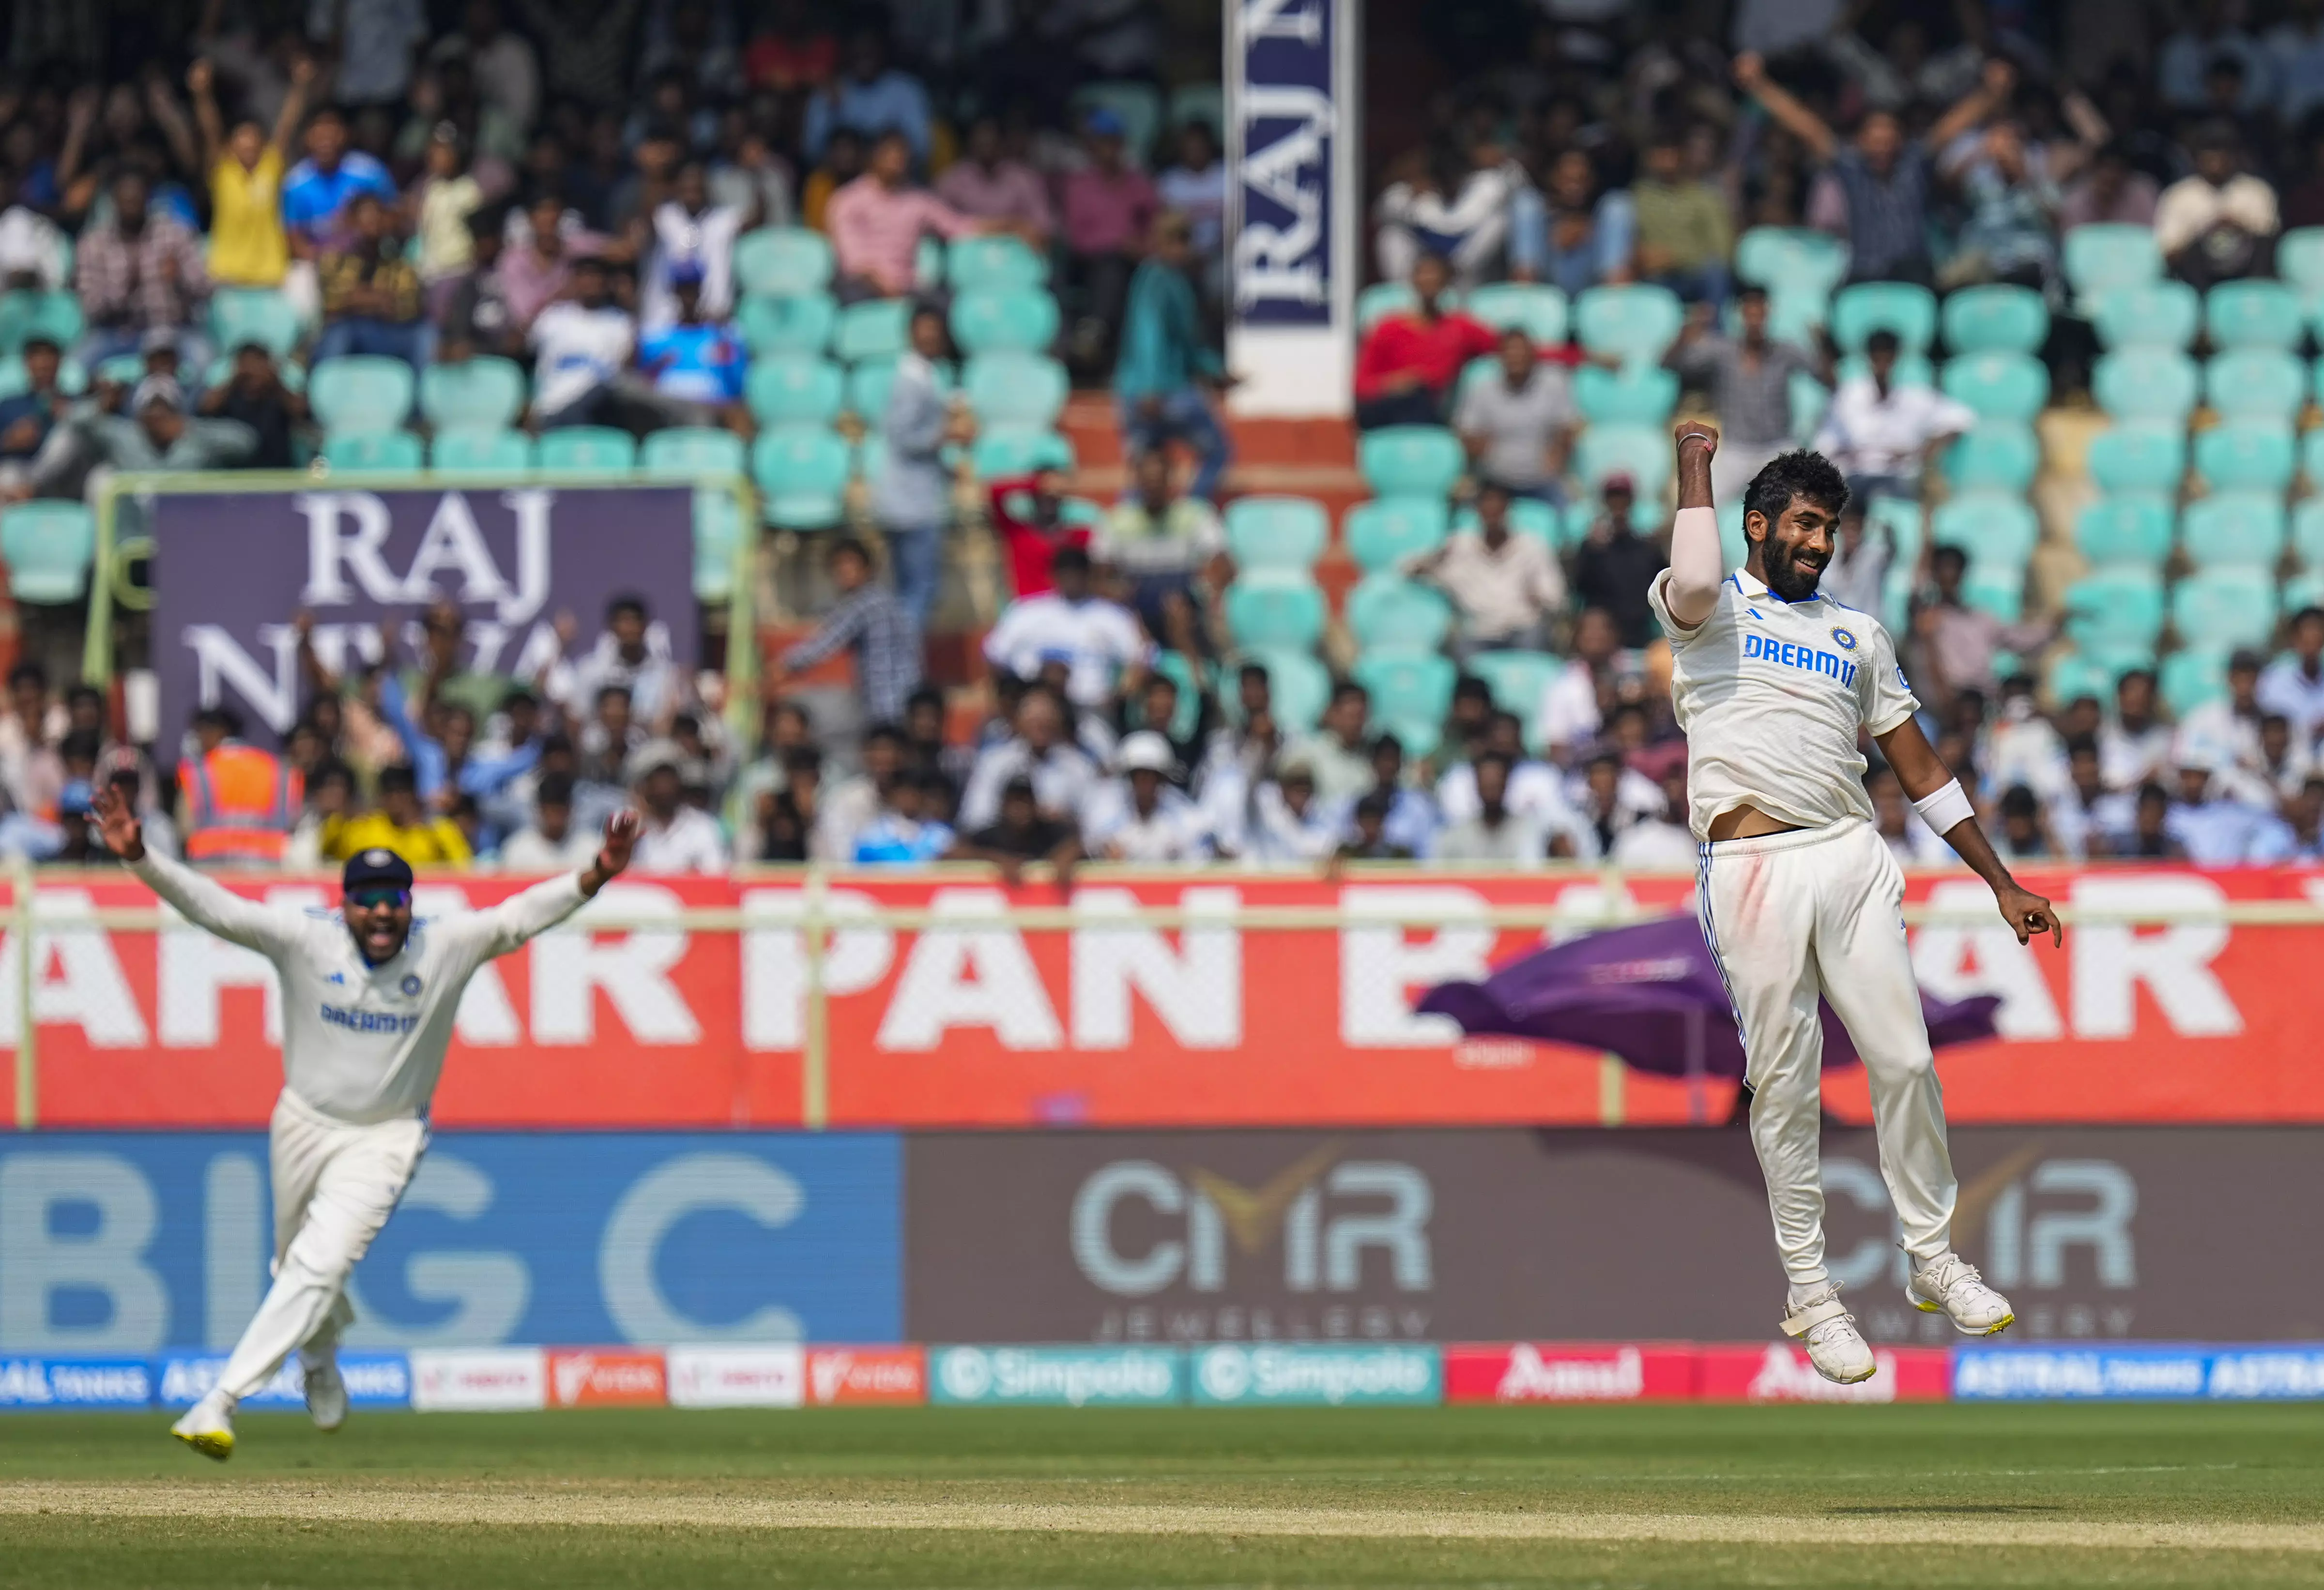 Visakhapatnams Lucky Streak Continues: India Wins Second Test Match